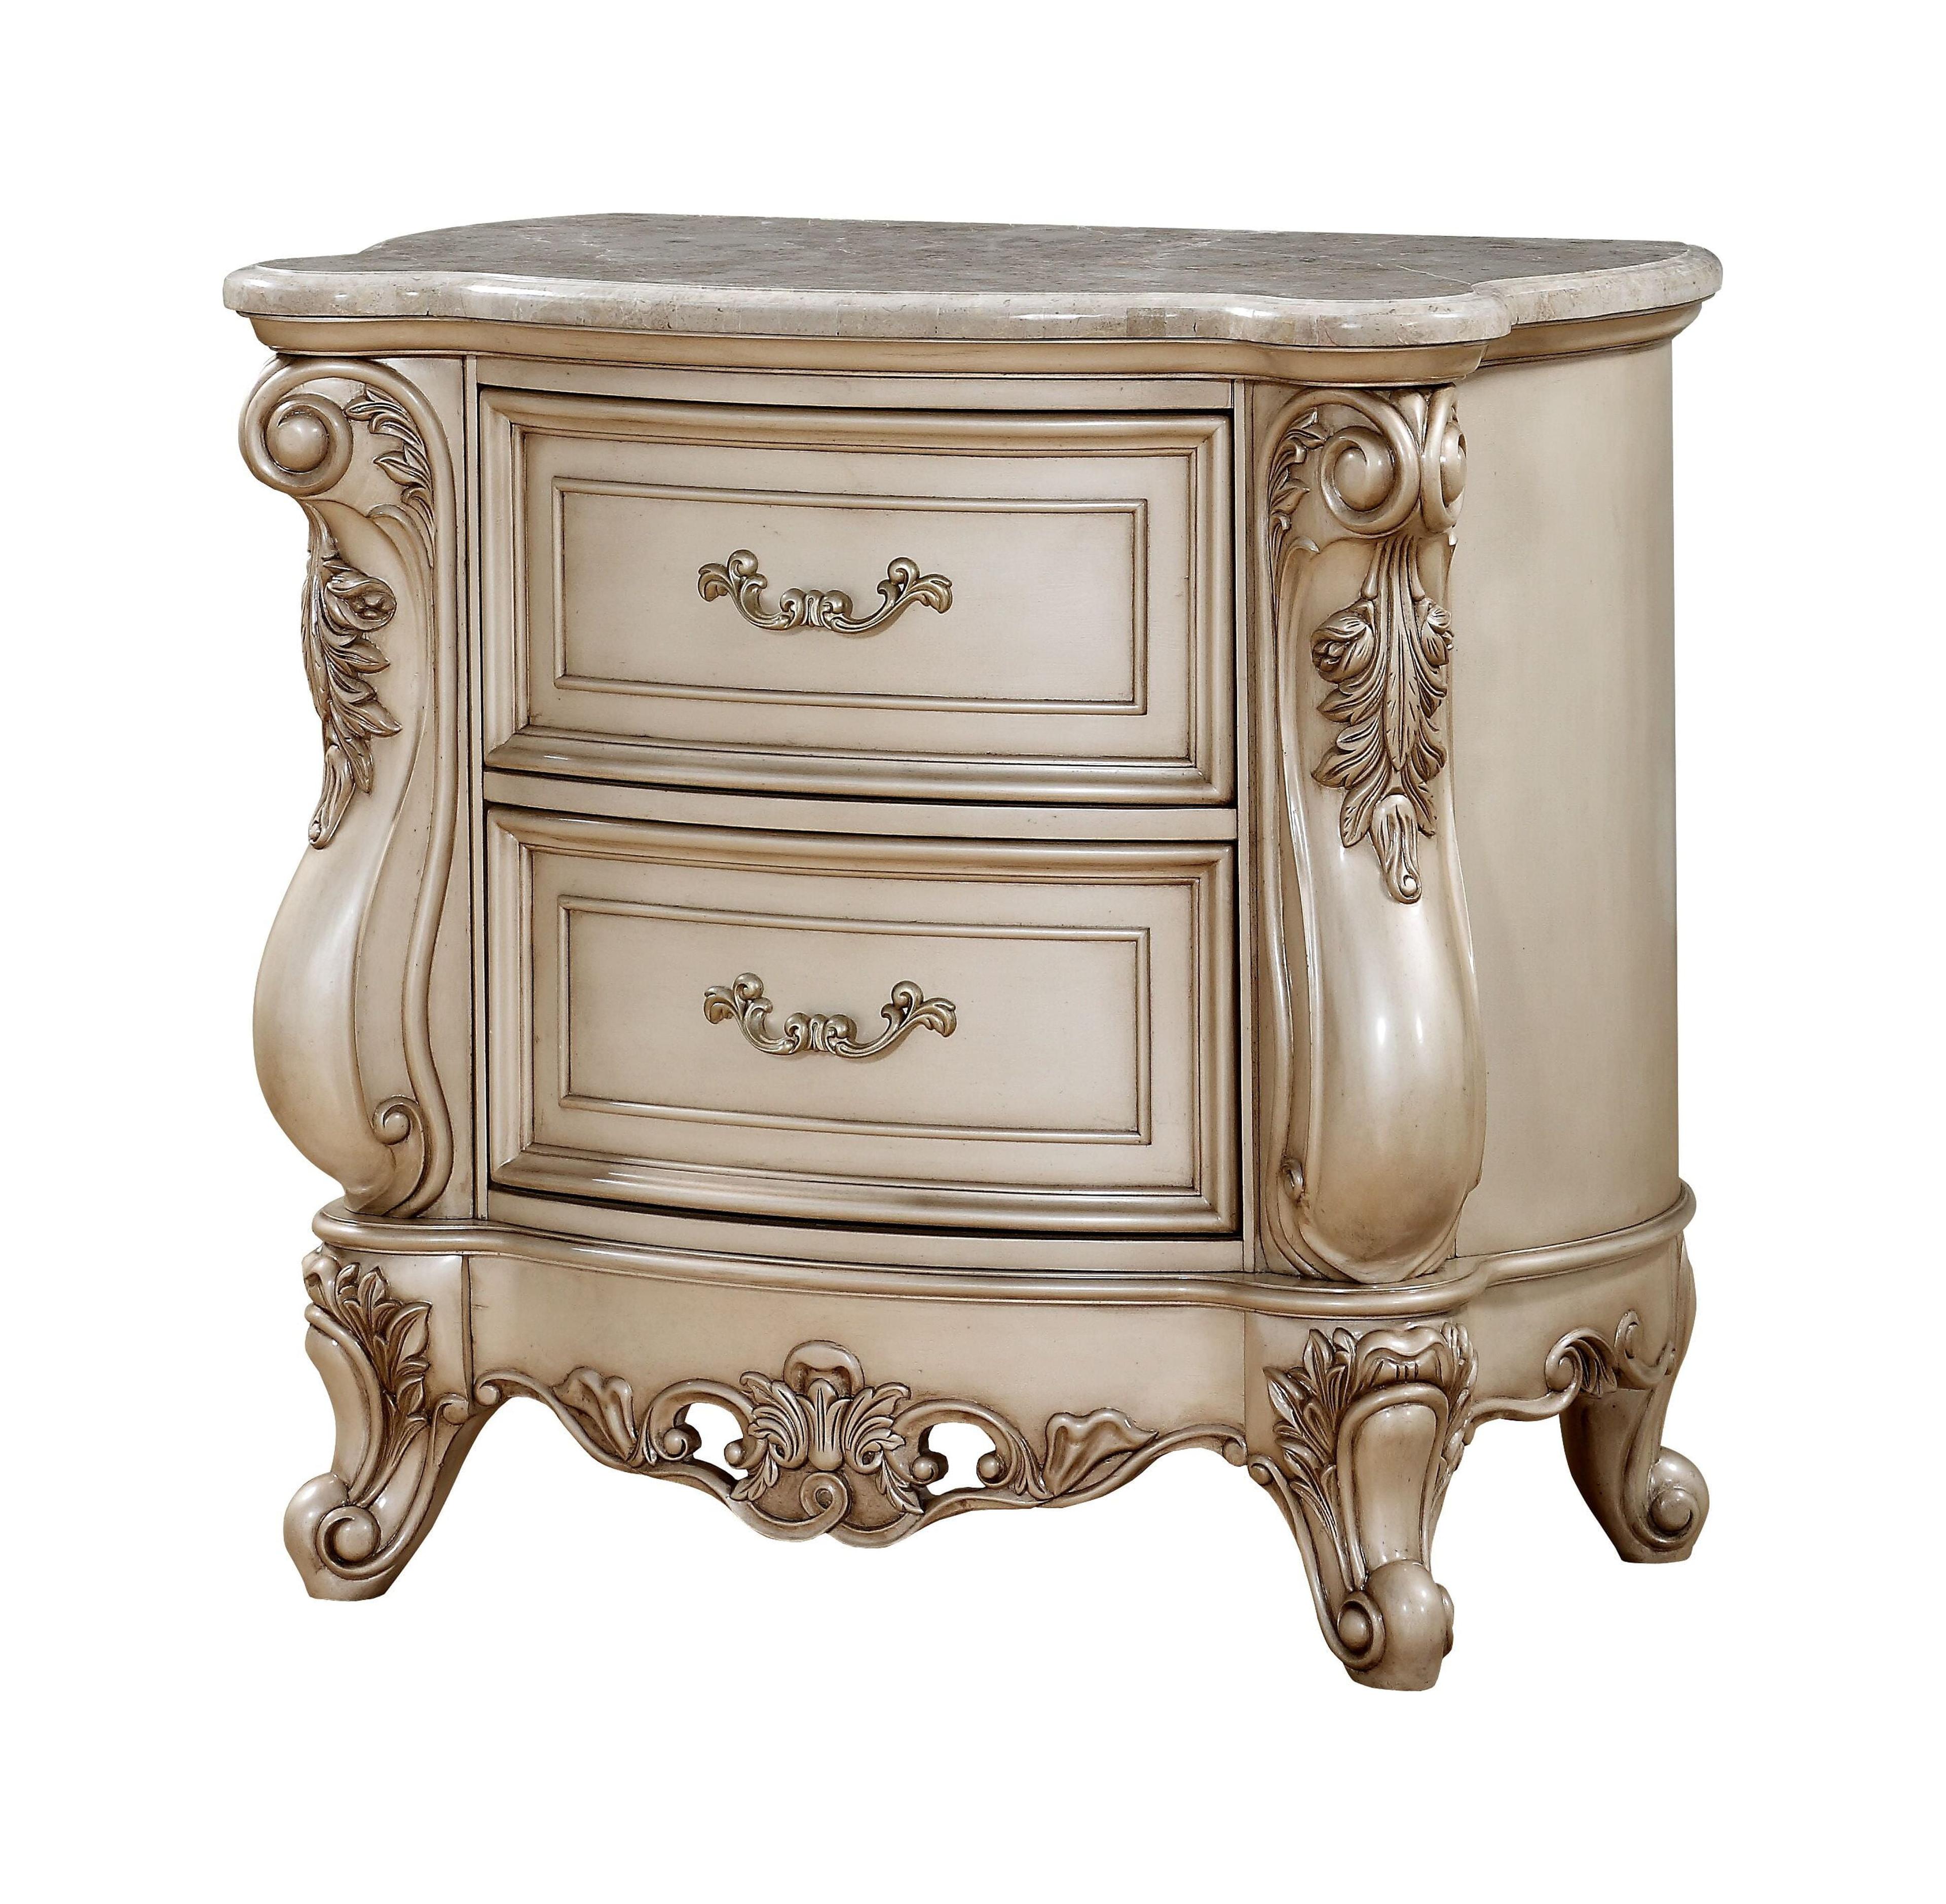 Gorsedd Antique Champagne 2-Drawer Nightstand with Marble Top